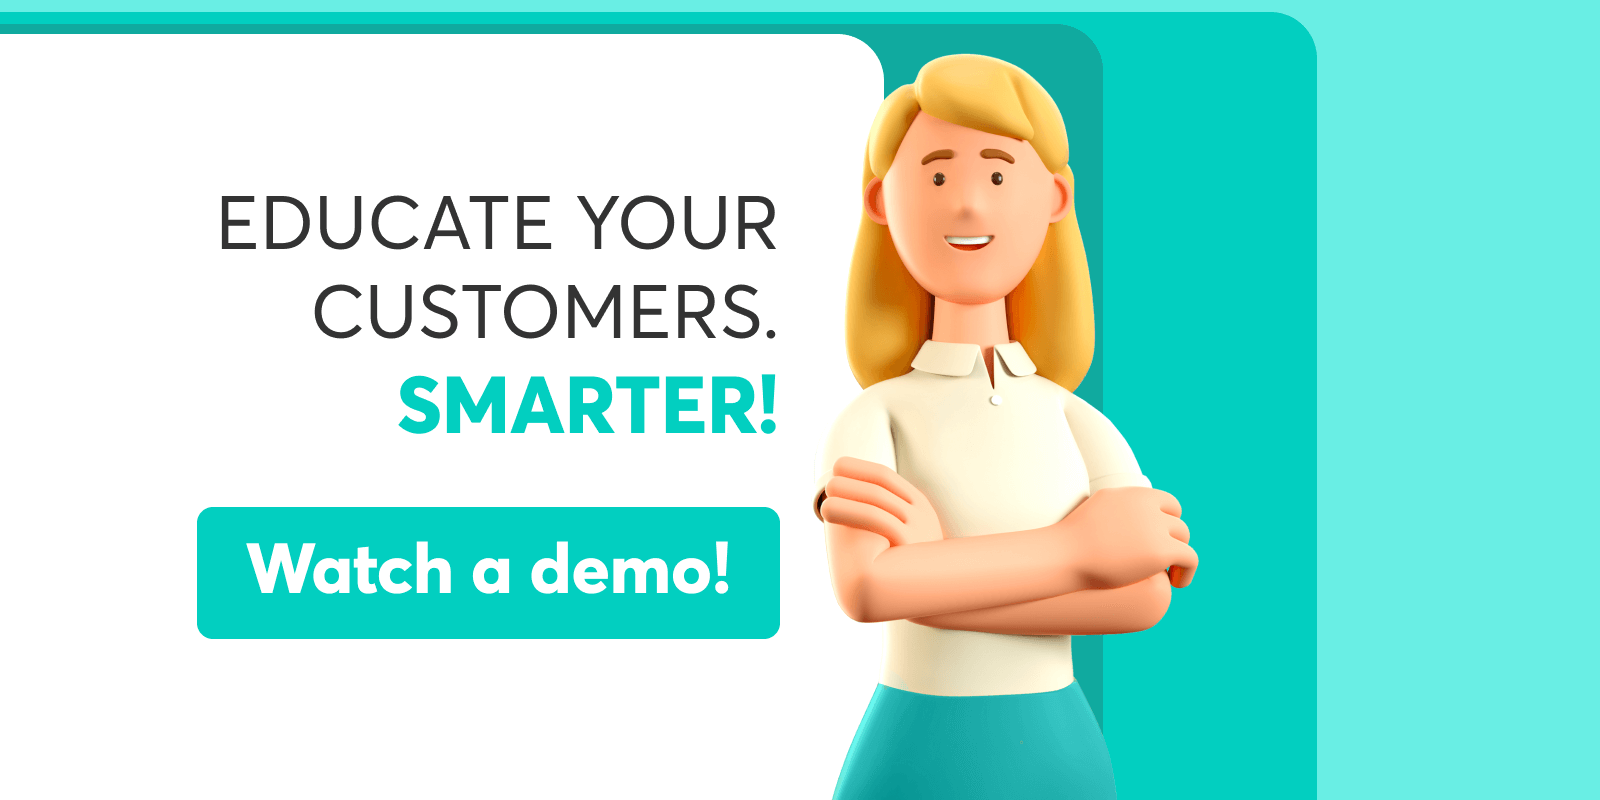 Educate your customers smarter - watch a demo.